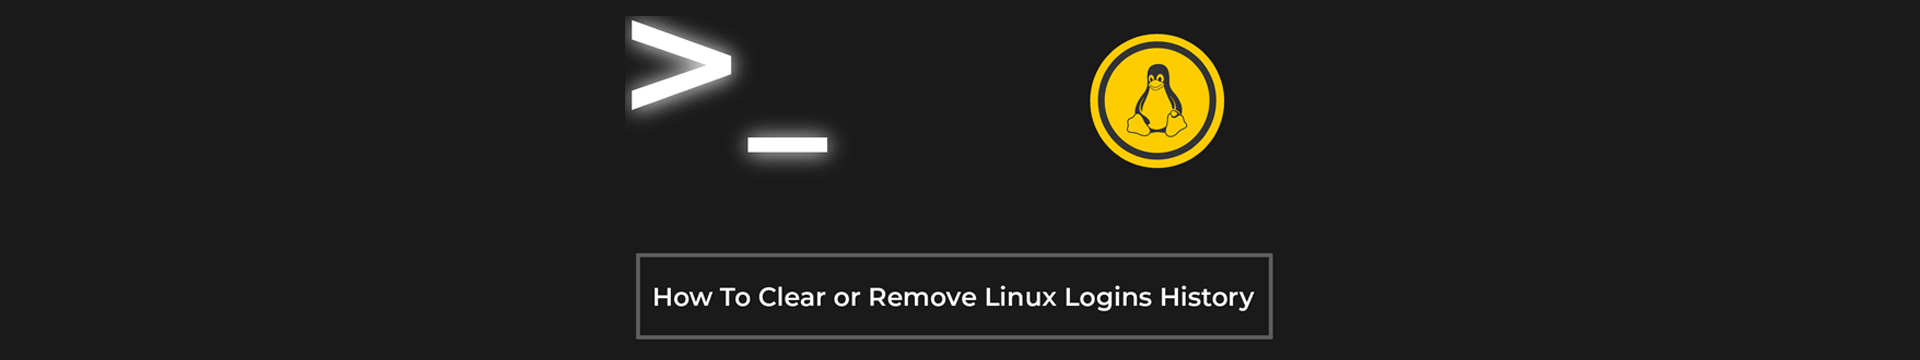 How To Clear or Remove Linux Logins History